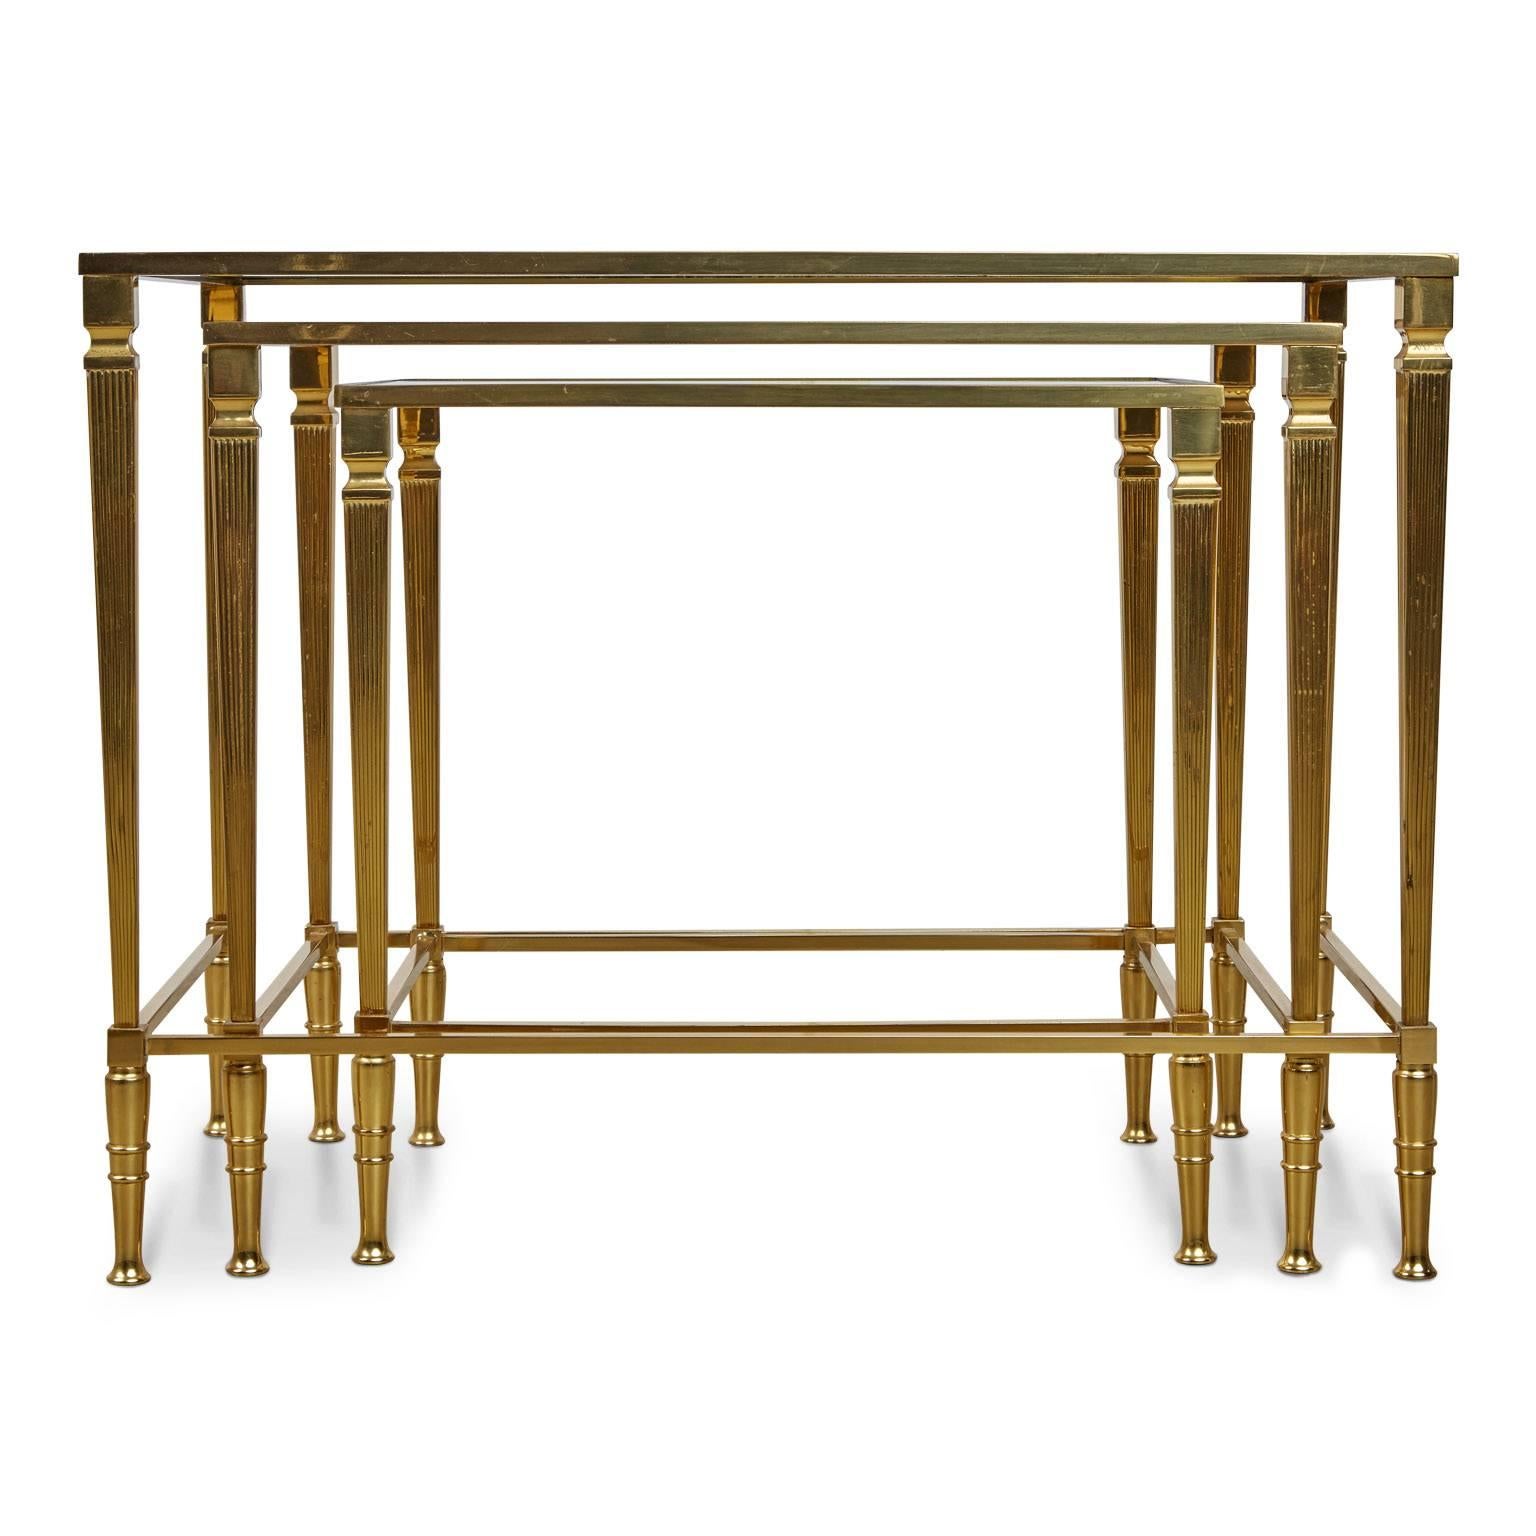 Set of three Regency style polished Italian nesting tables. Fabricated from gleaming polished brass with slender reeded legs and glass tops with contrast mirror edge borders on each. These compact side tables fit neatly in to one another to conserve